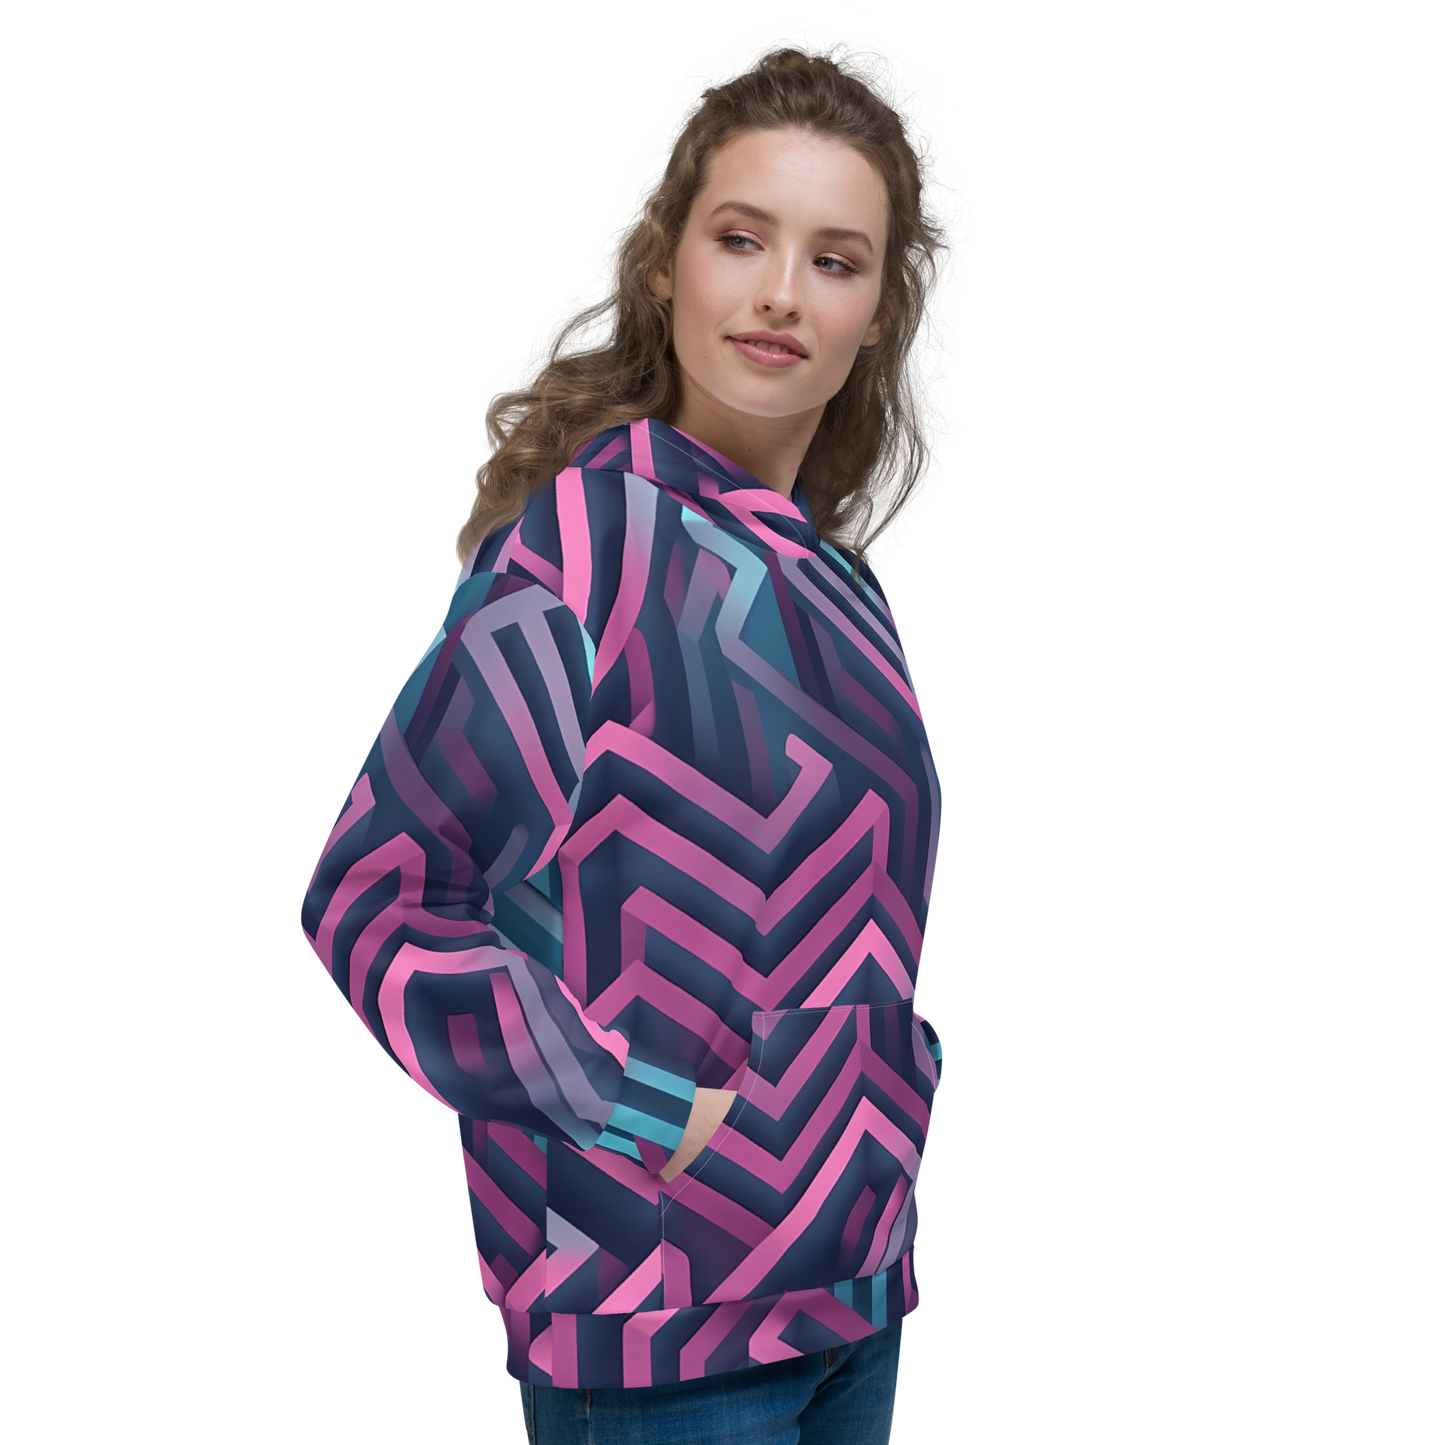 3D Maze Illusion | 3D Patterns | All-Over Print Unisex Hoodie - #4